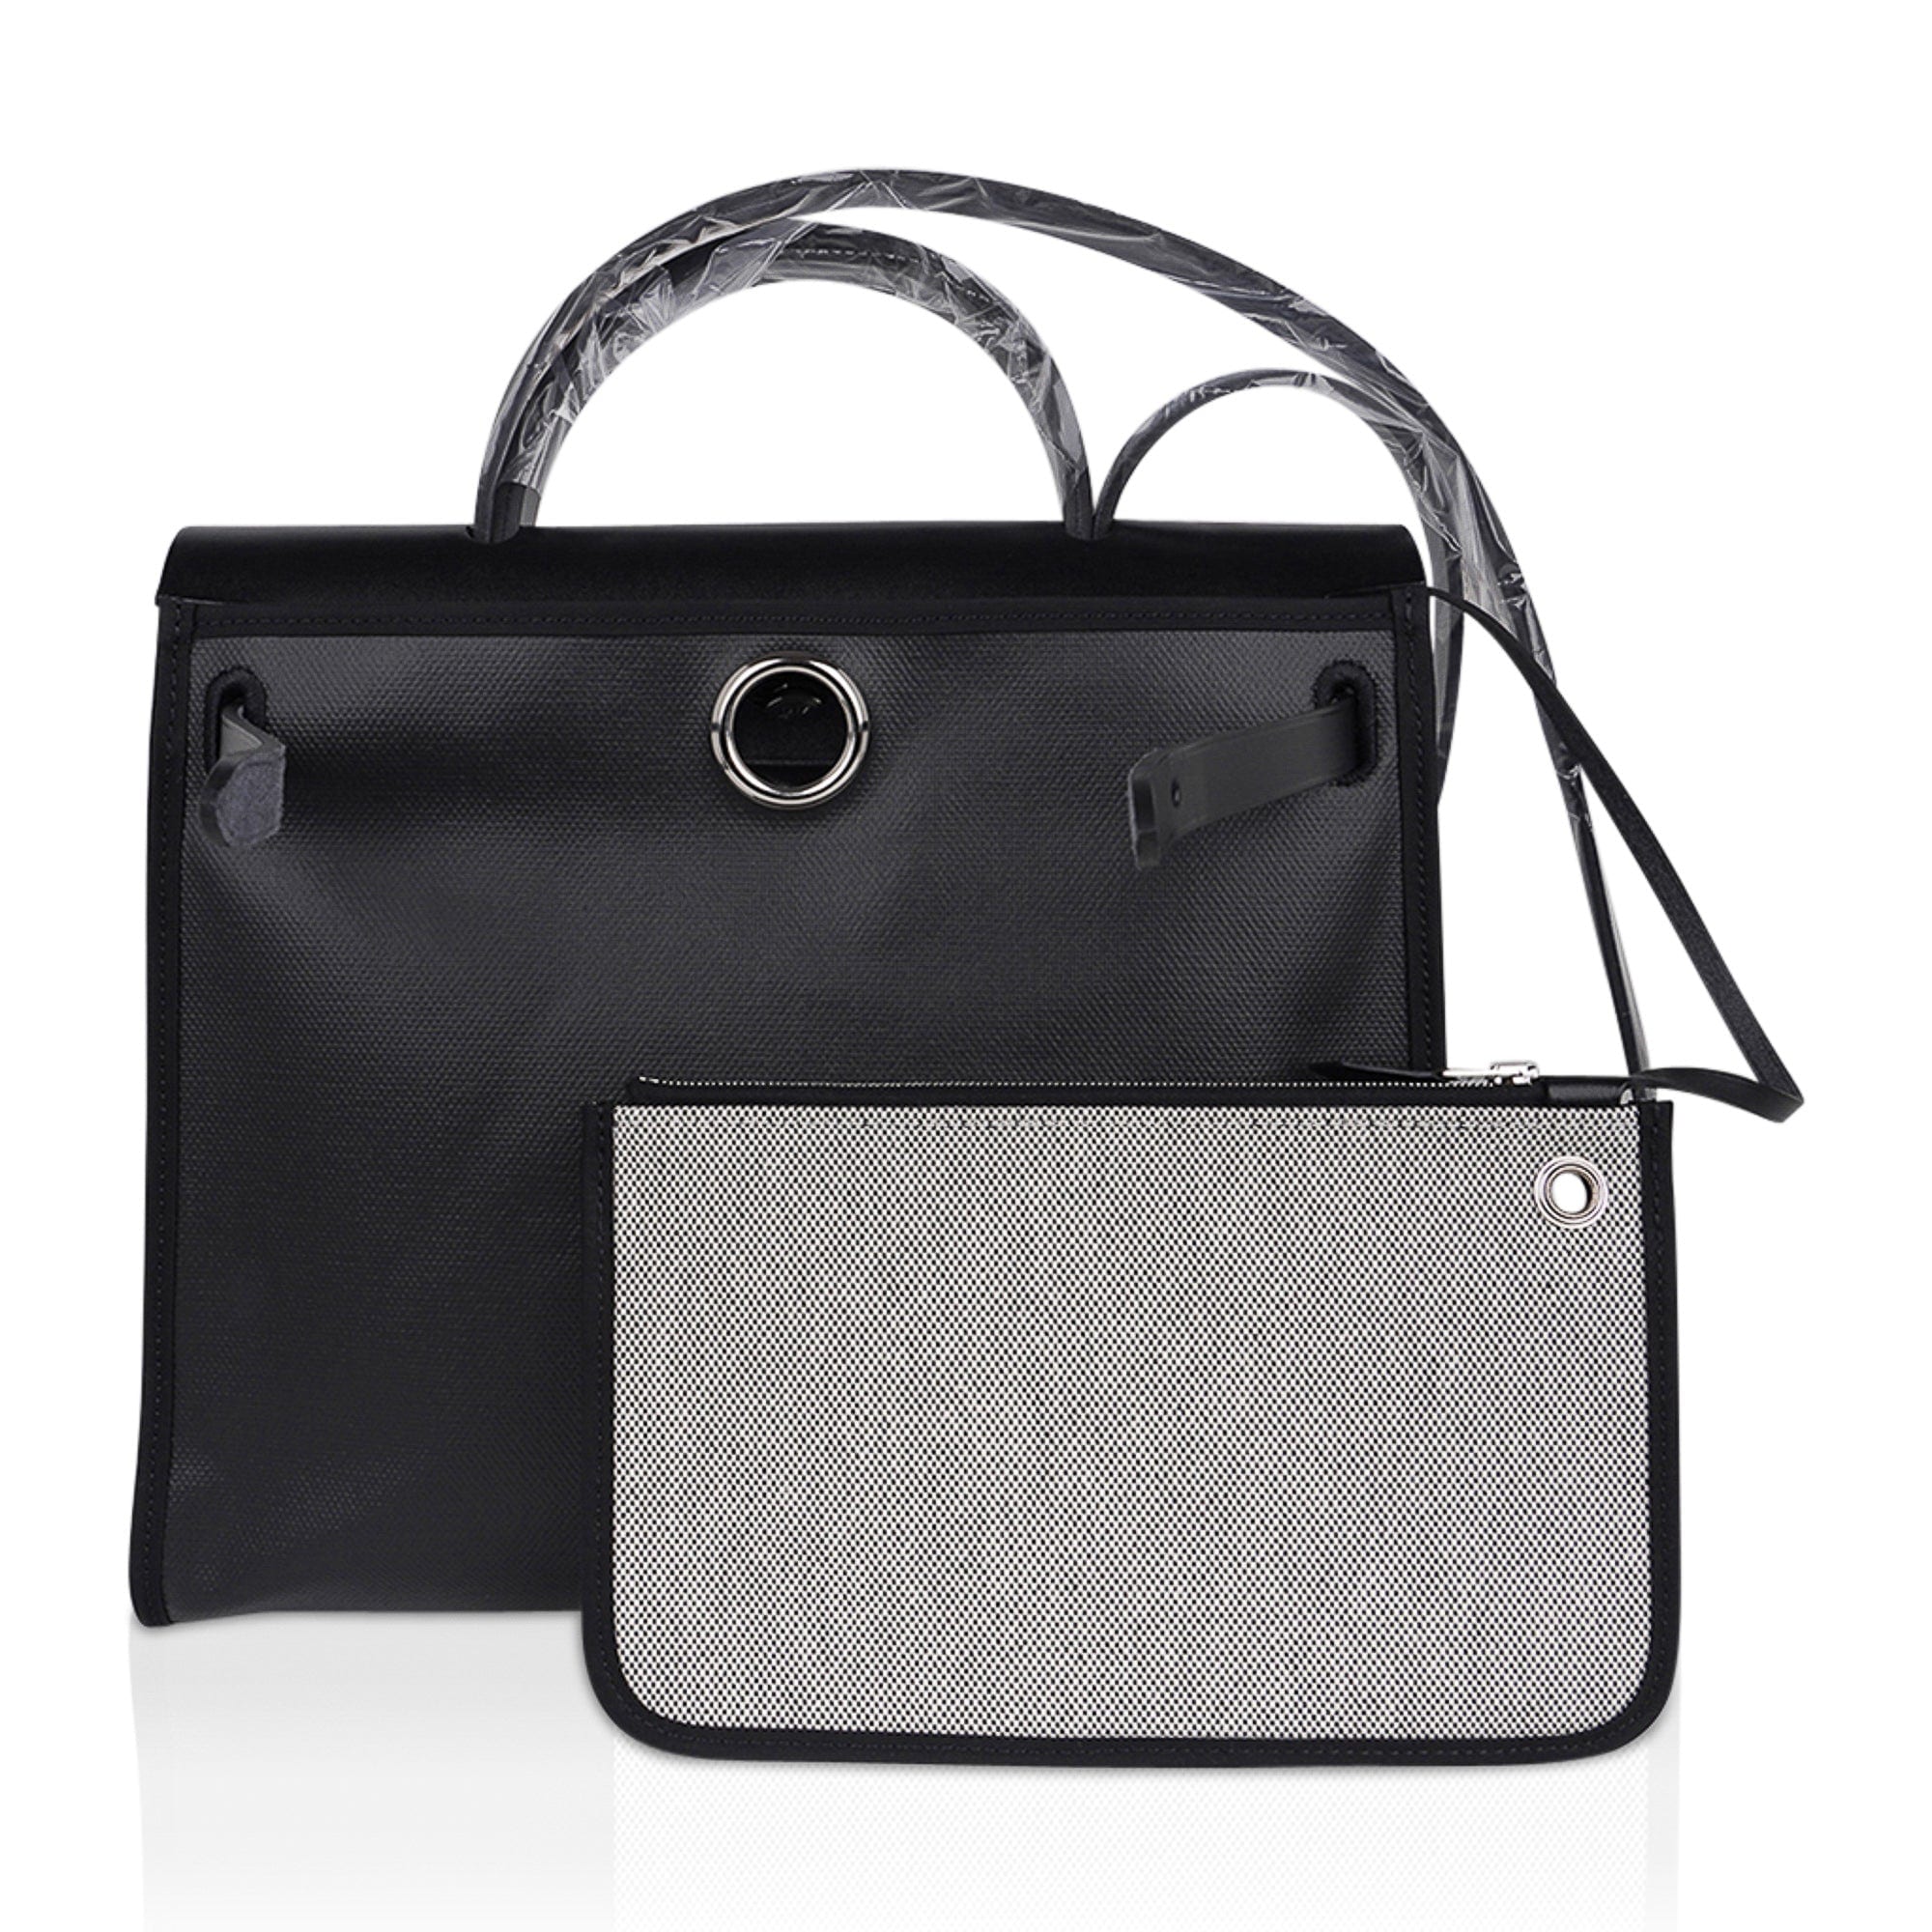 Danse - Herbag high-end leather goods.